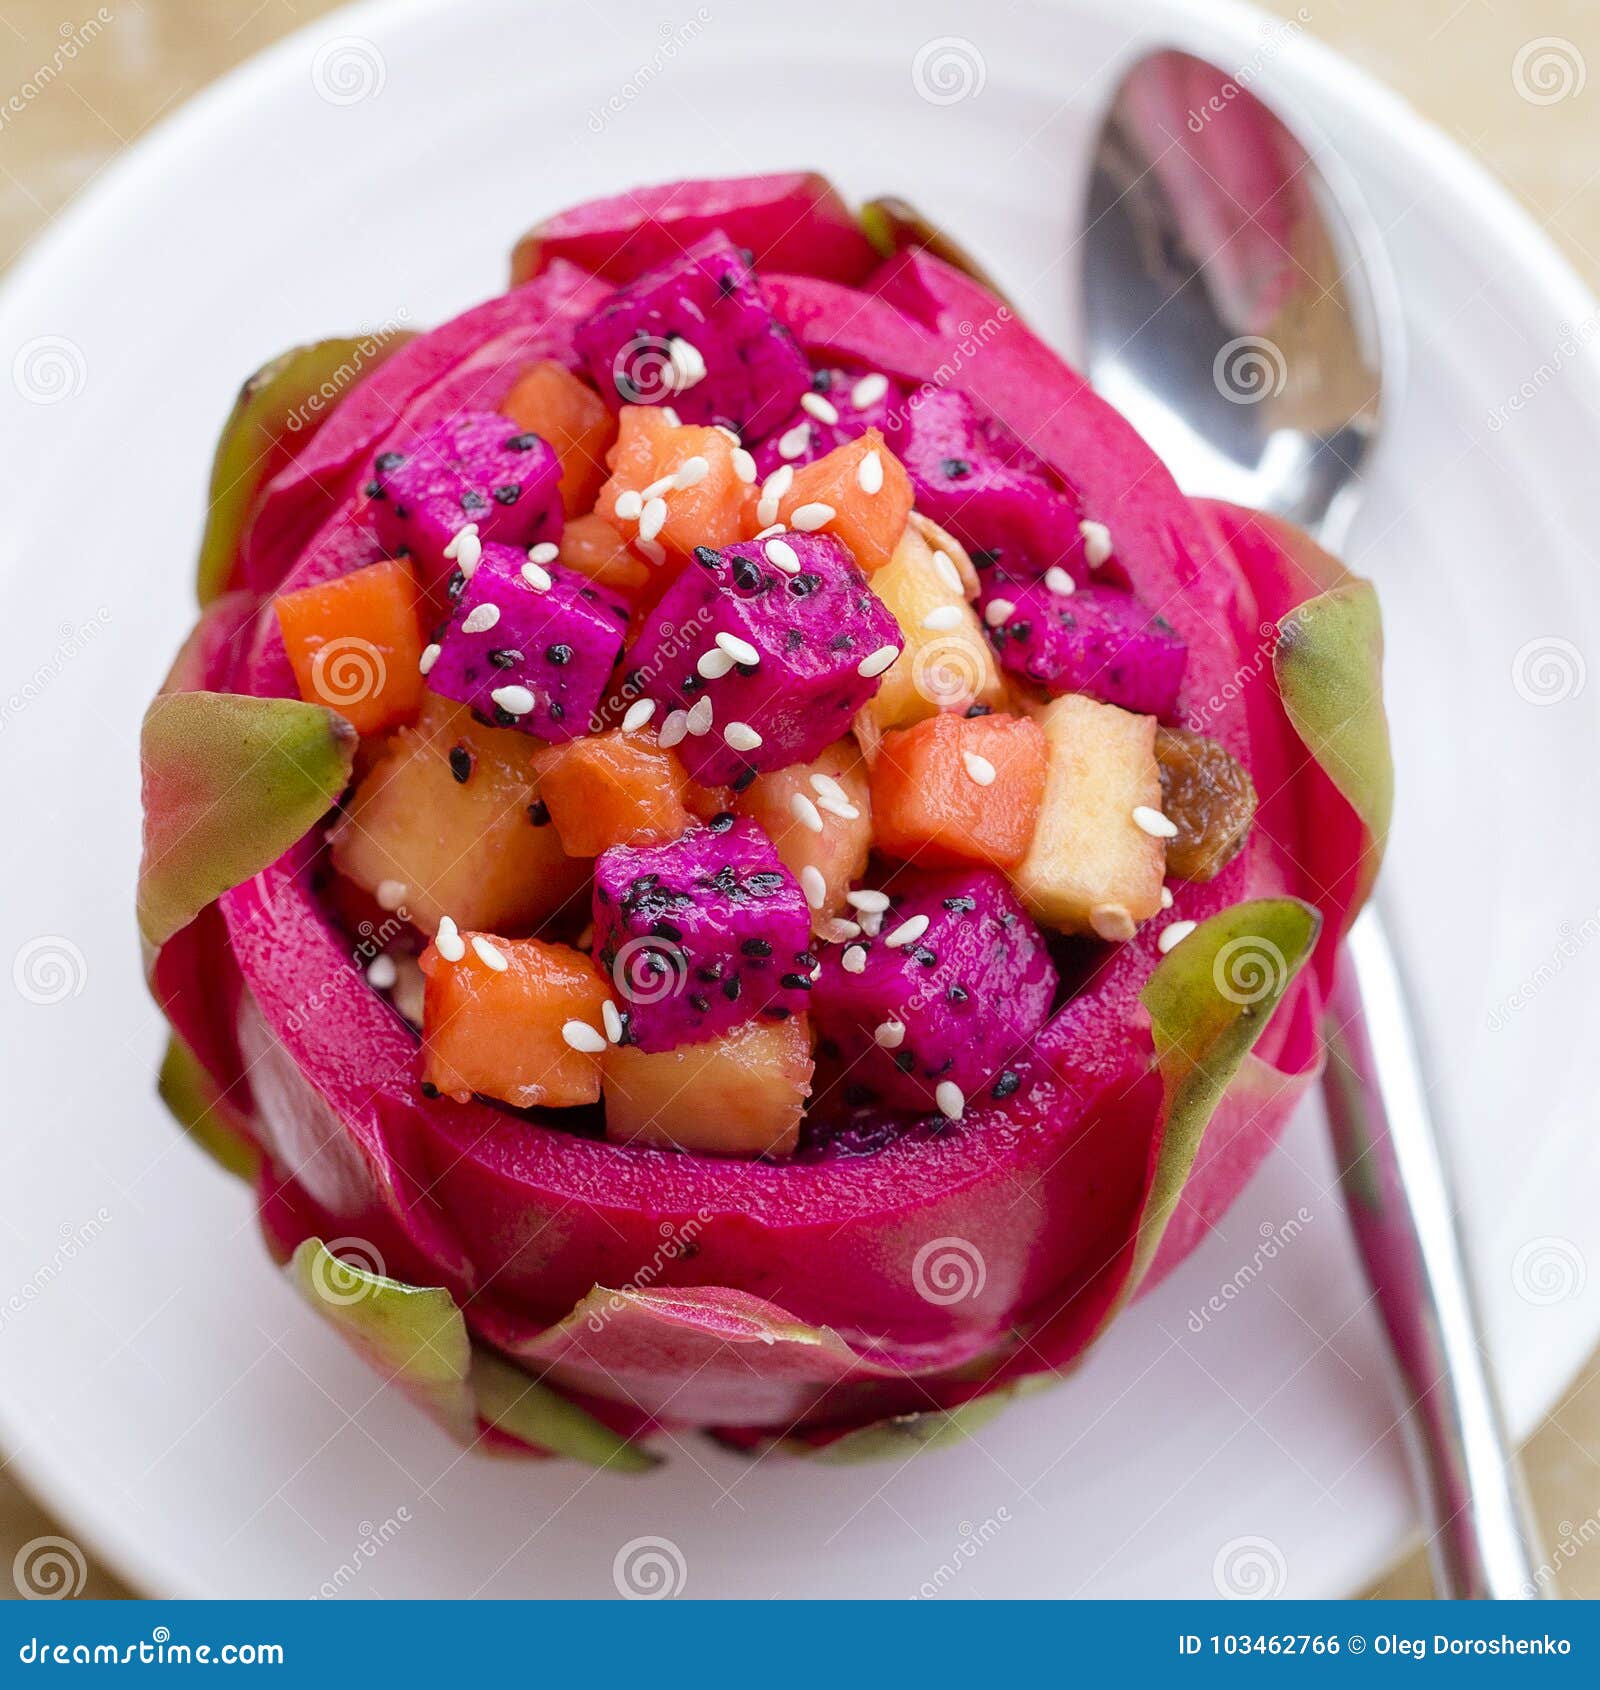 What are the benefits of Dragon fruit to your body ?